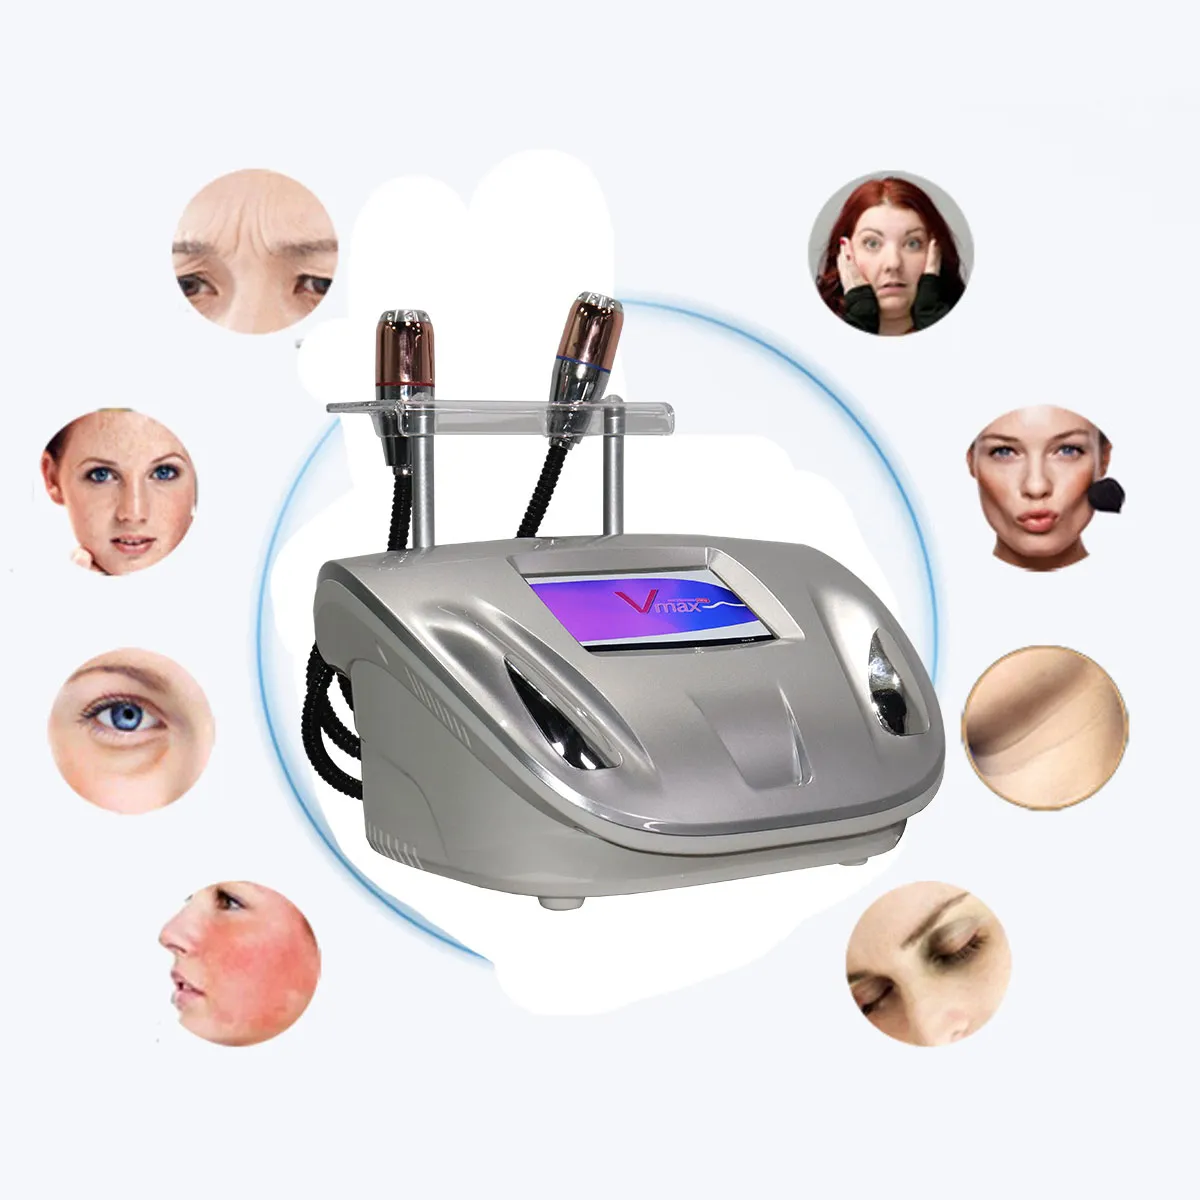 RF Equipment HIFU VMAX Pain-Free Face Lift Anti-Wrinkle V-MAX High Intensity Focused Ultrasound Machine With 2 Handles Beauty devices